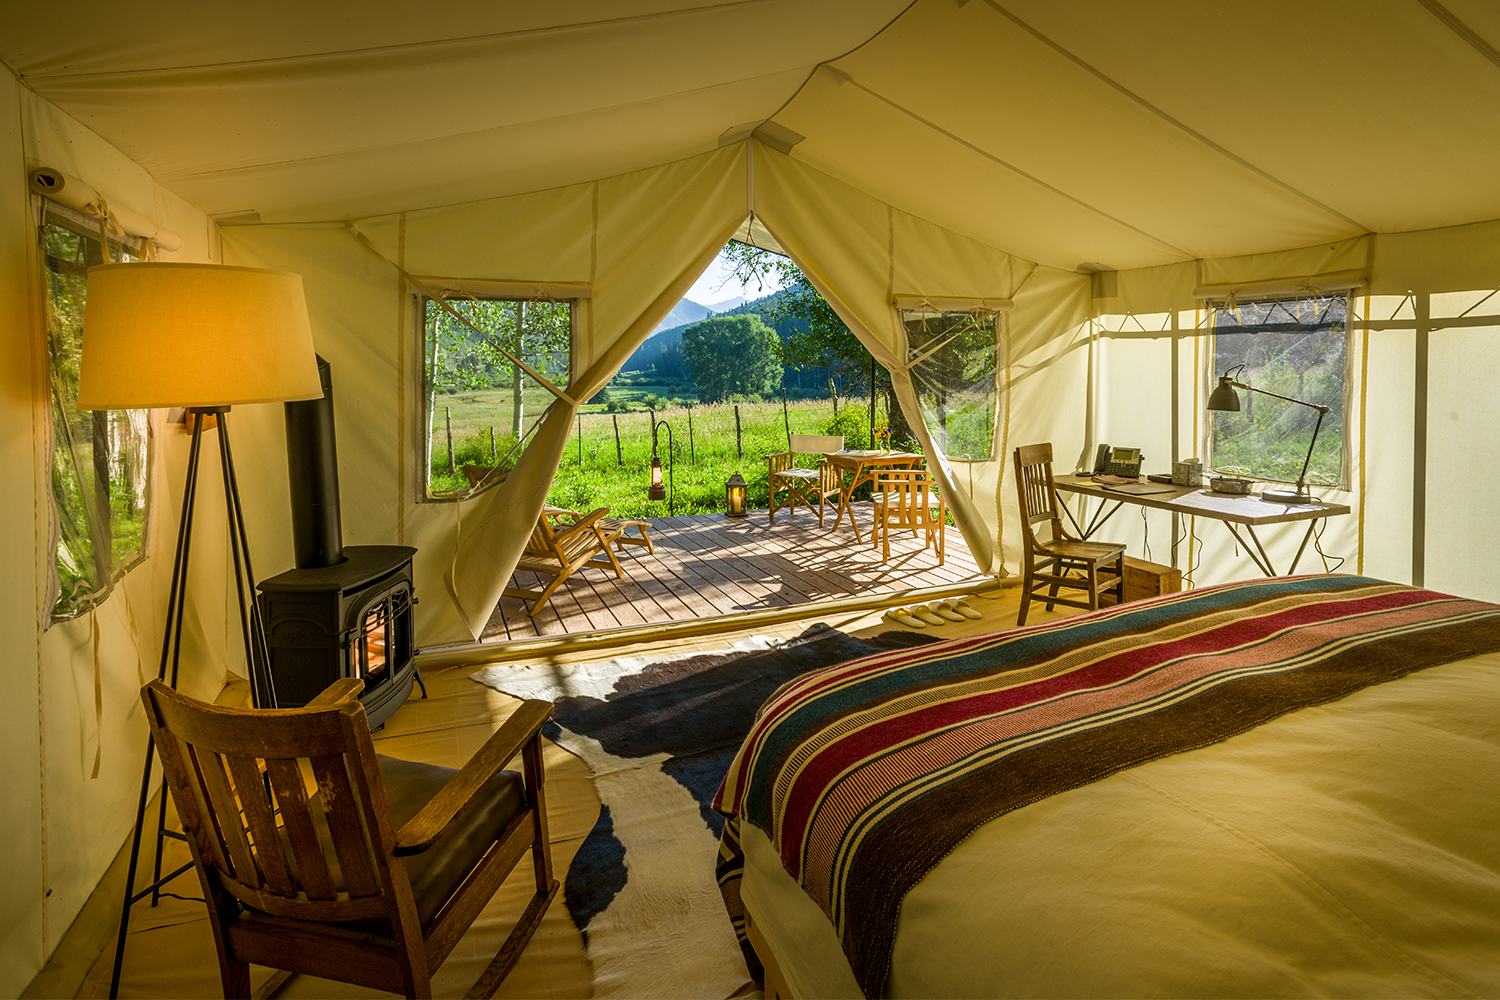 A view from inside a luxury tent at Dunton River Camp, one of the best ranch resorts in the U.S.